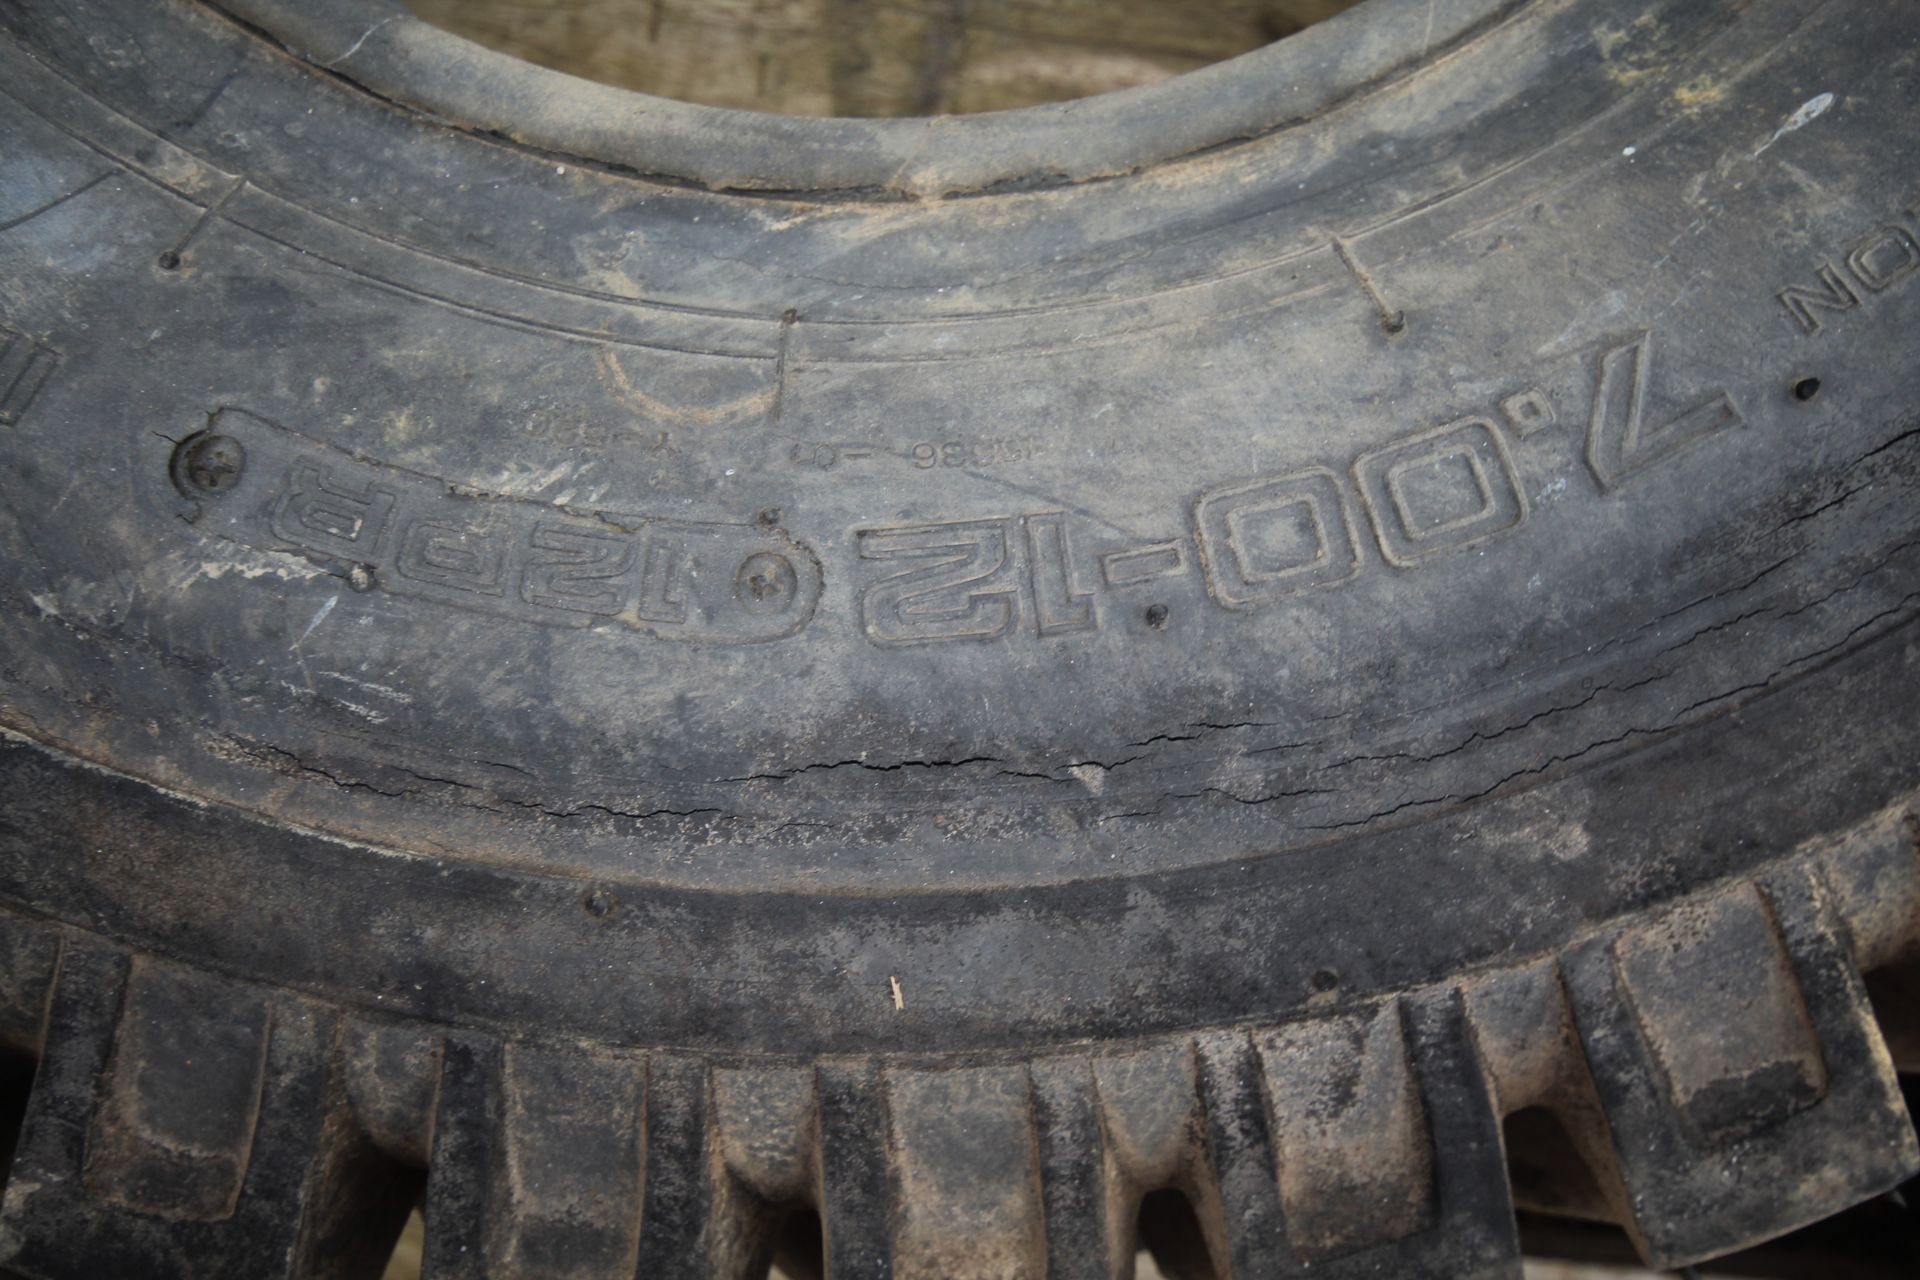 700x12 forklift tyre @ 100%. - Image 4 of 4